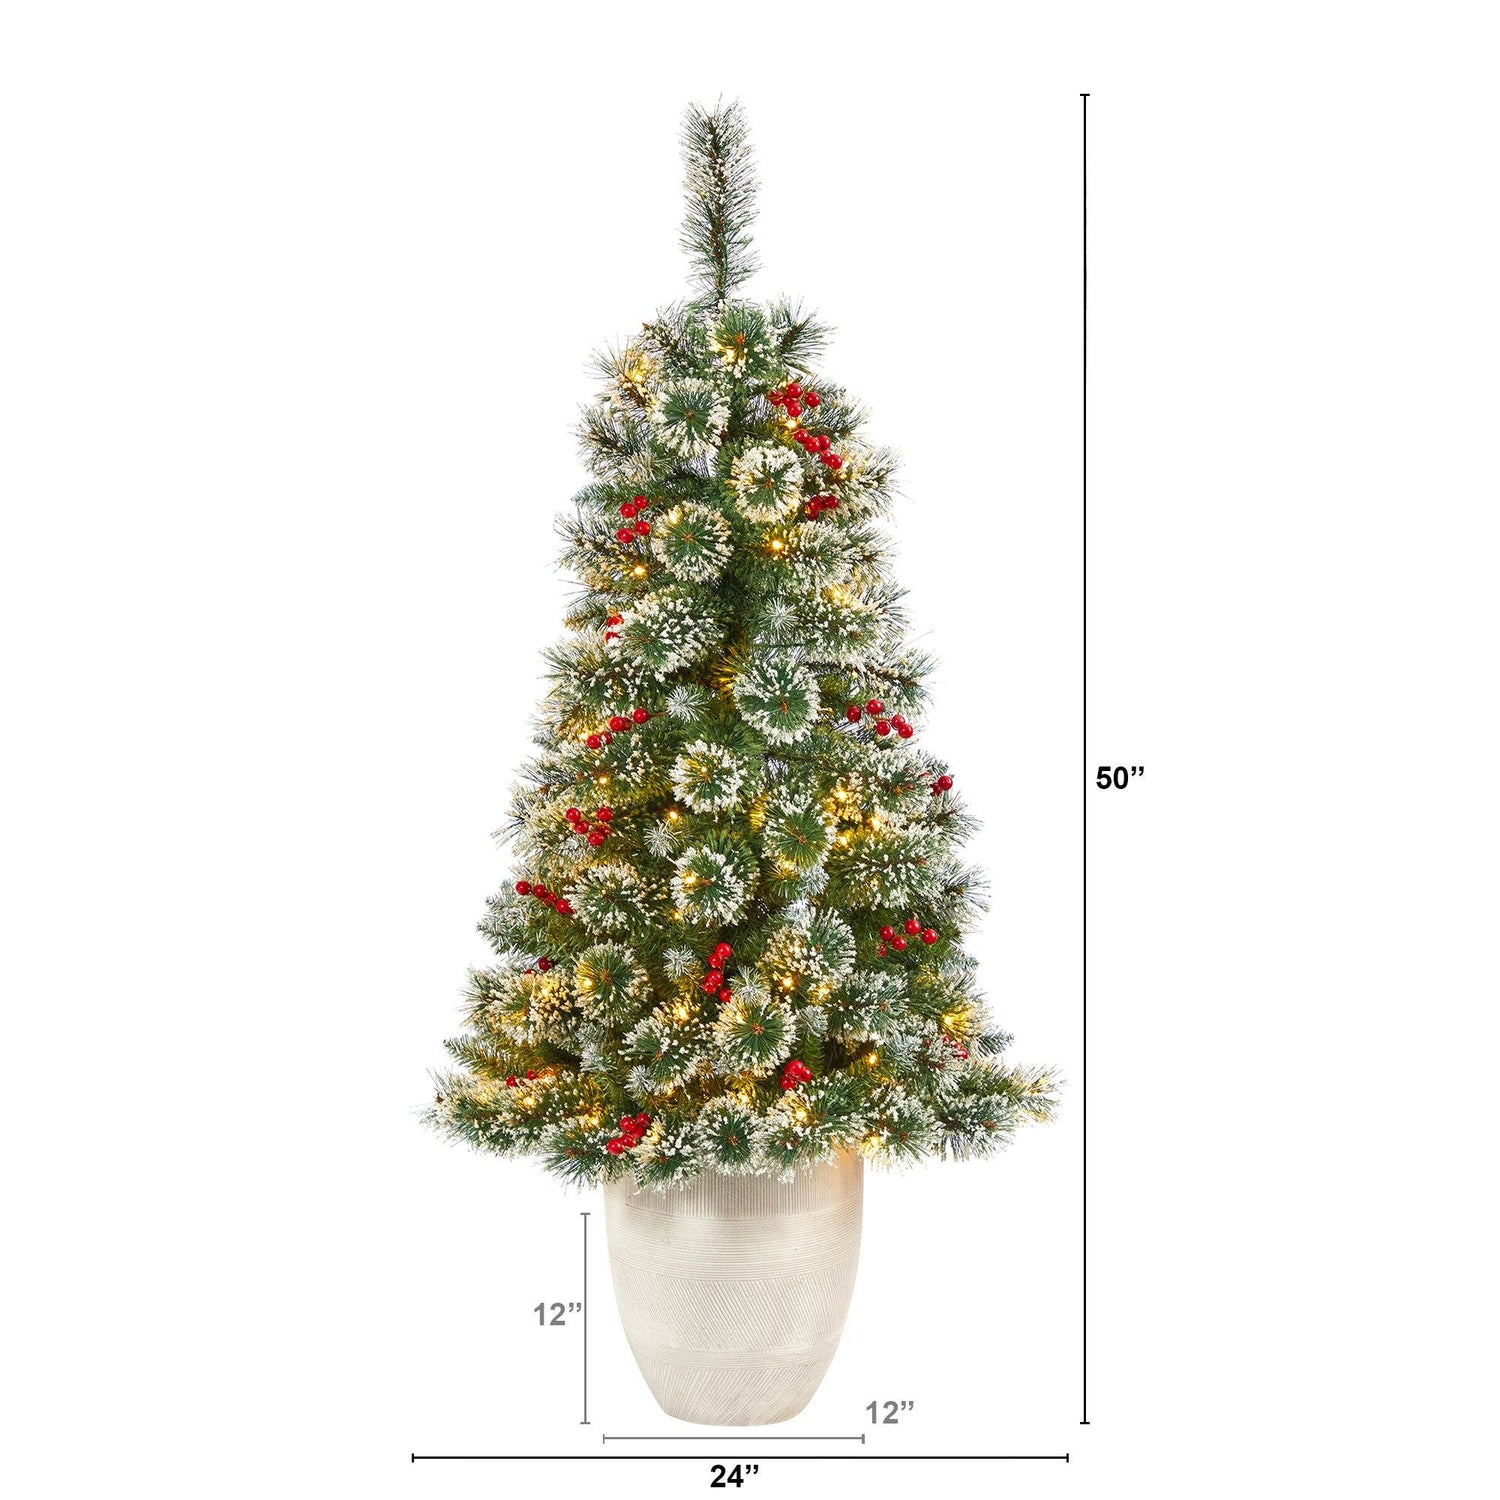 50” Frosted Swiss Pine Artificial Christmas Tree with 100 Clear LED Lights and Berries in White Planter